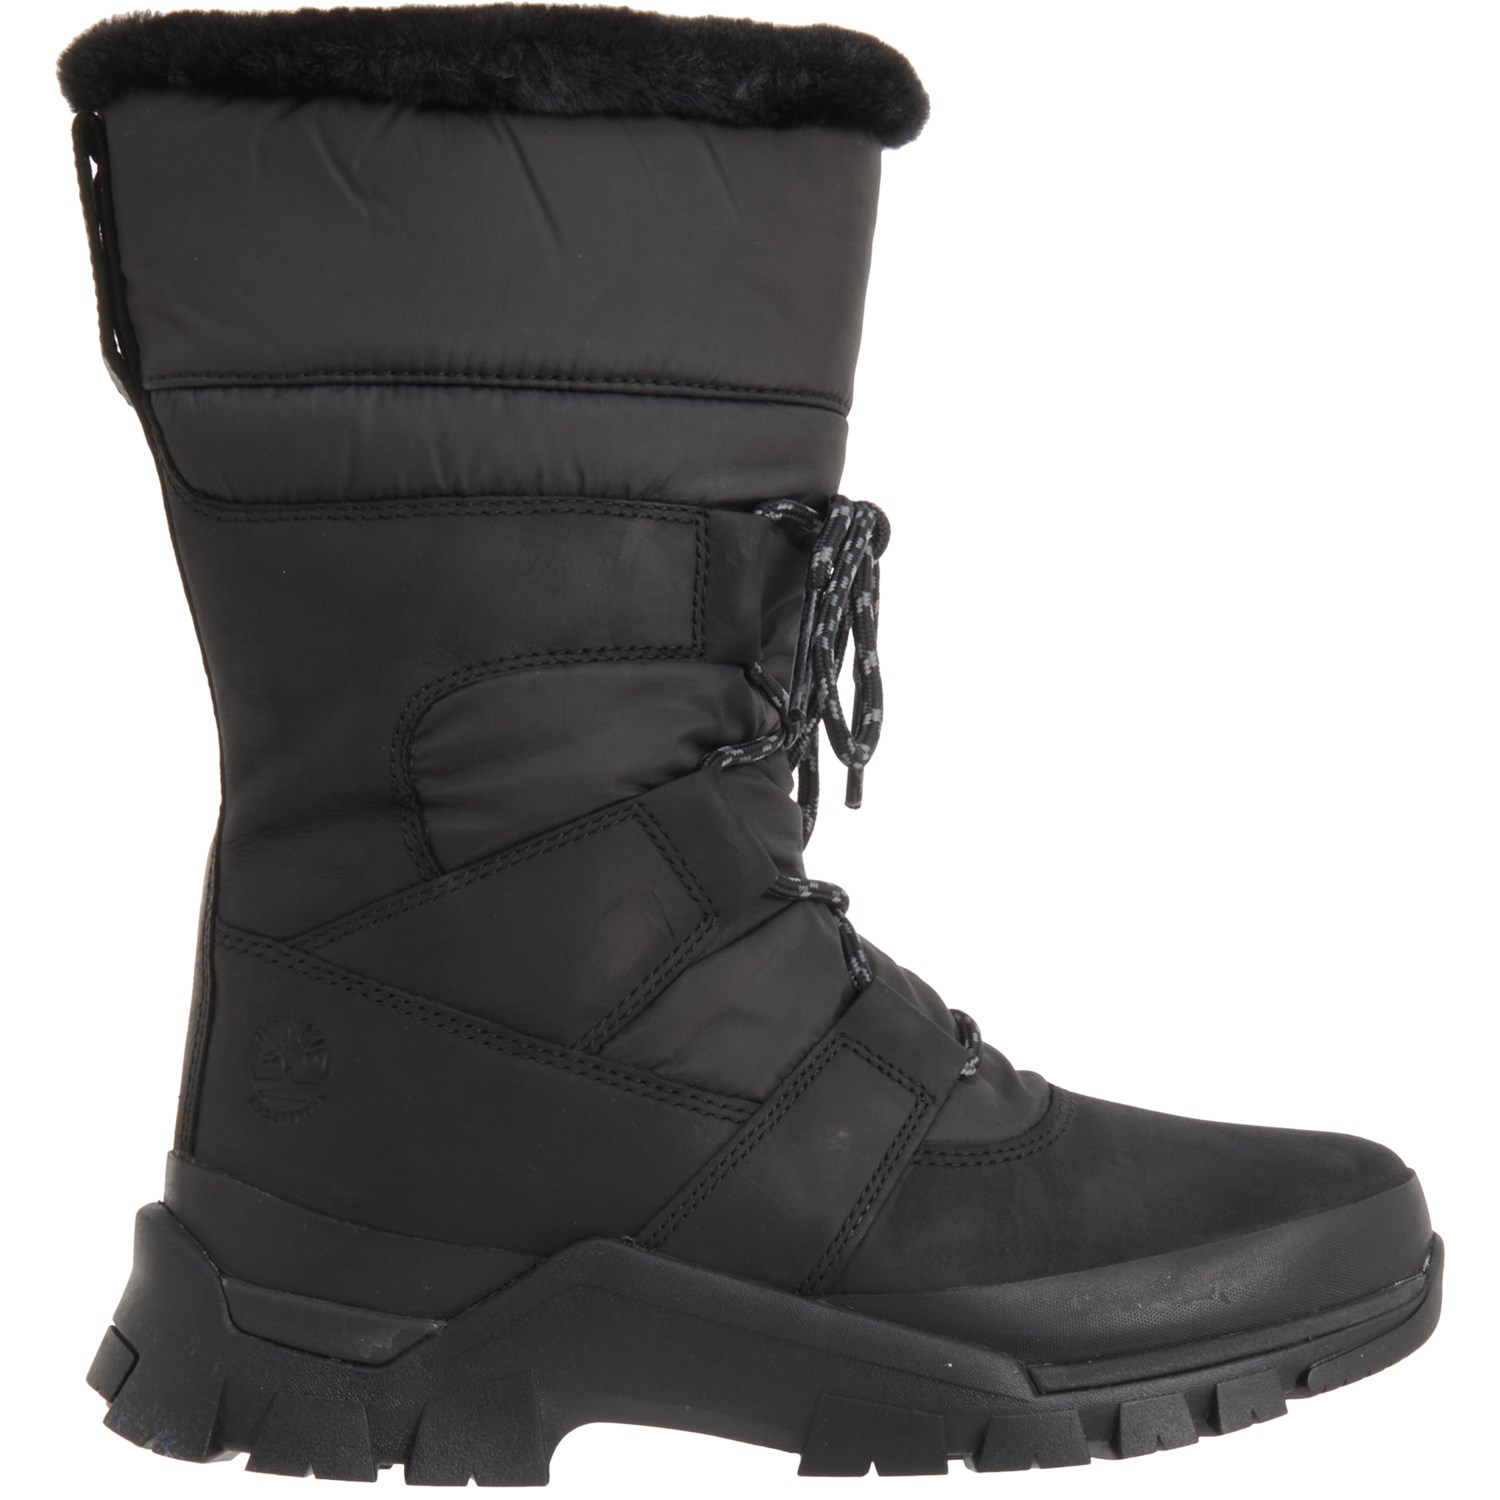 Timberland Jenness Falls Winter Boots (For Women) - Save 33%